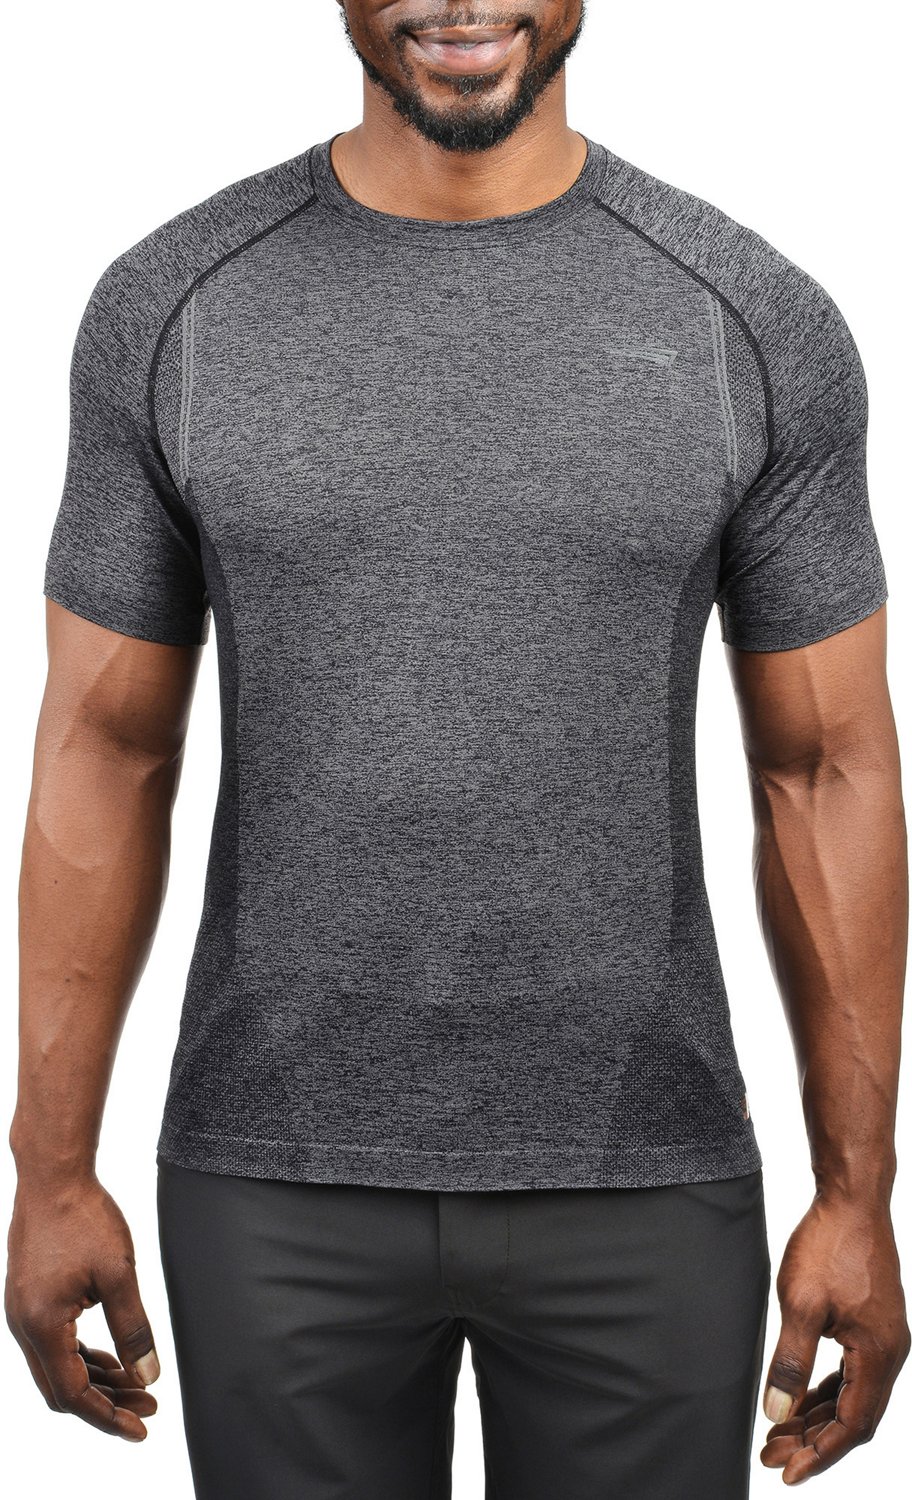 Search Results - Copper fit shirts | Academy